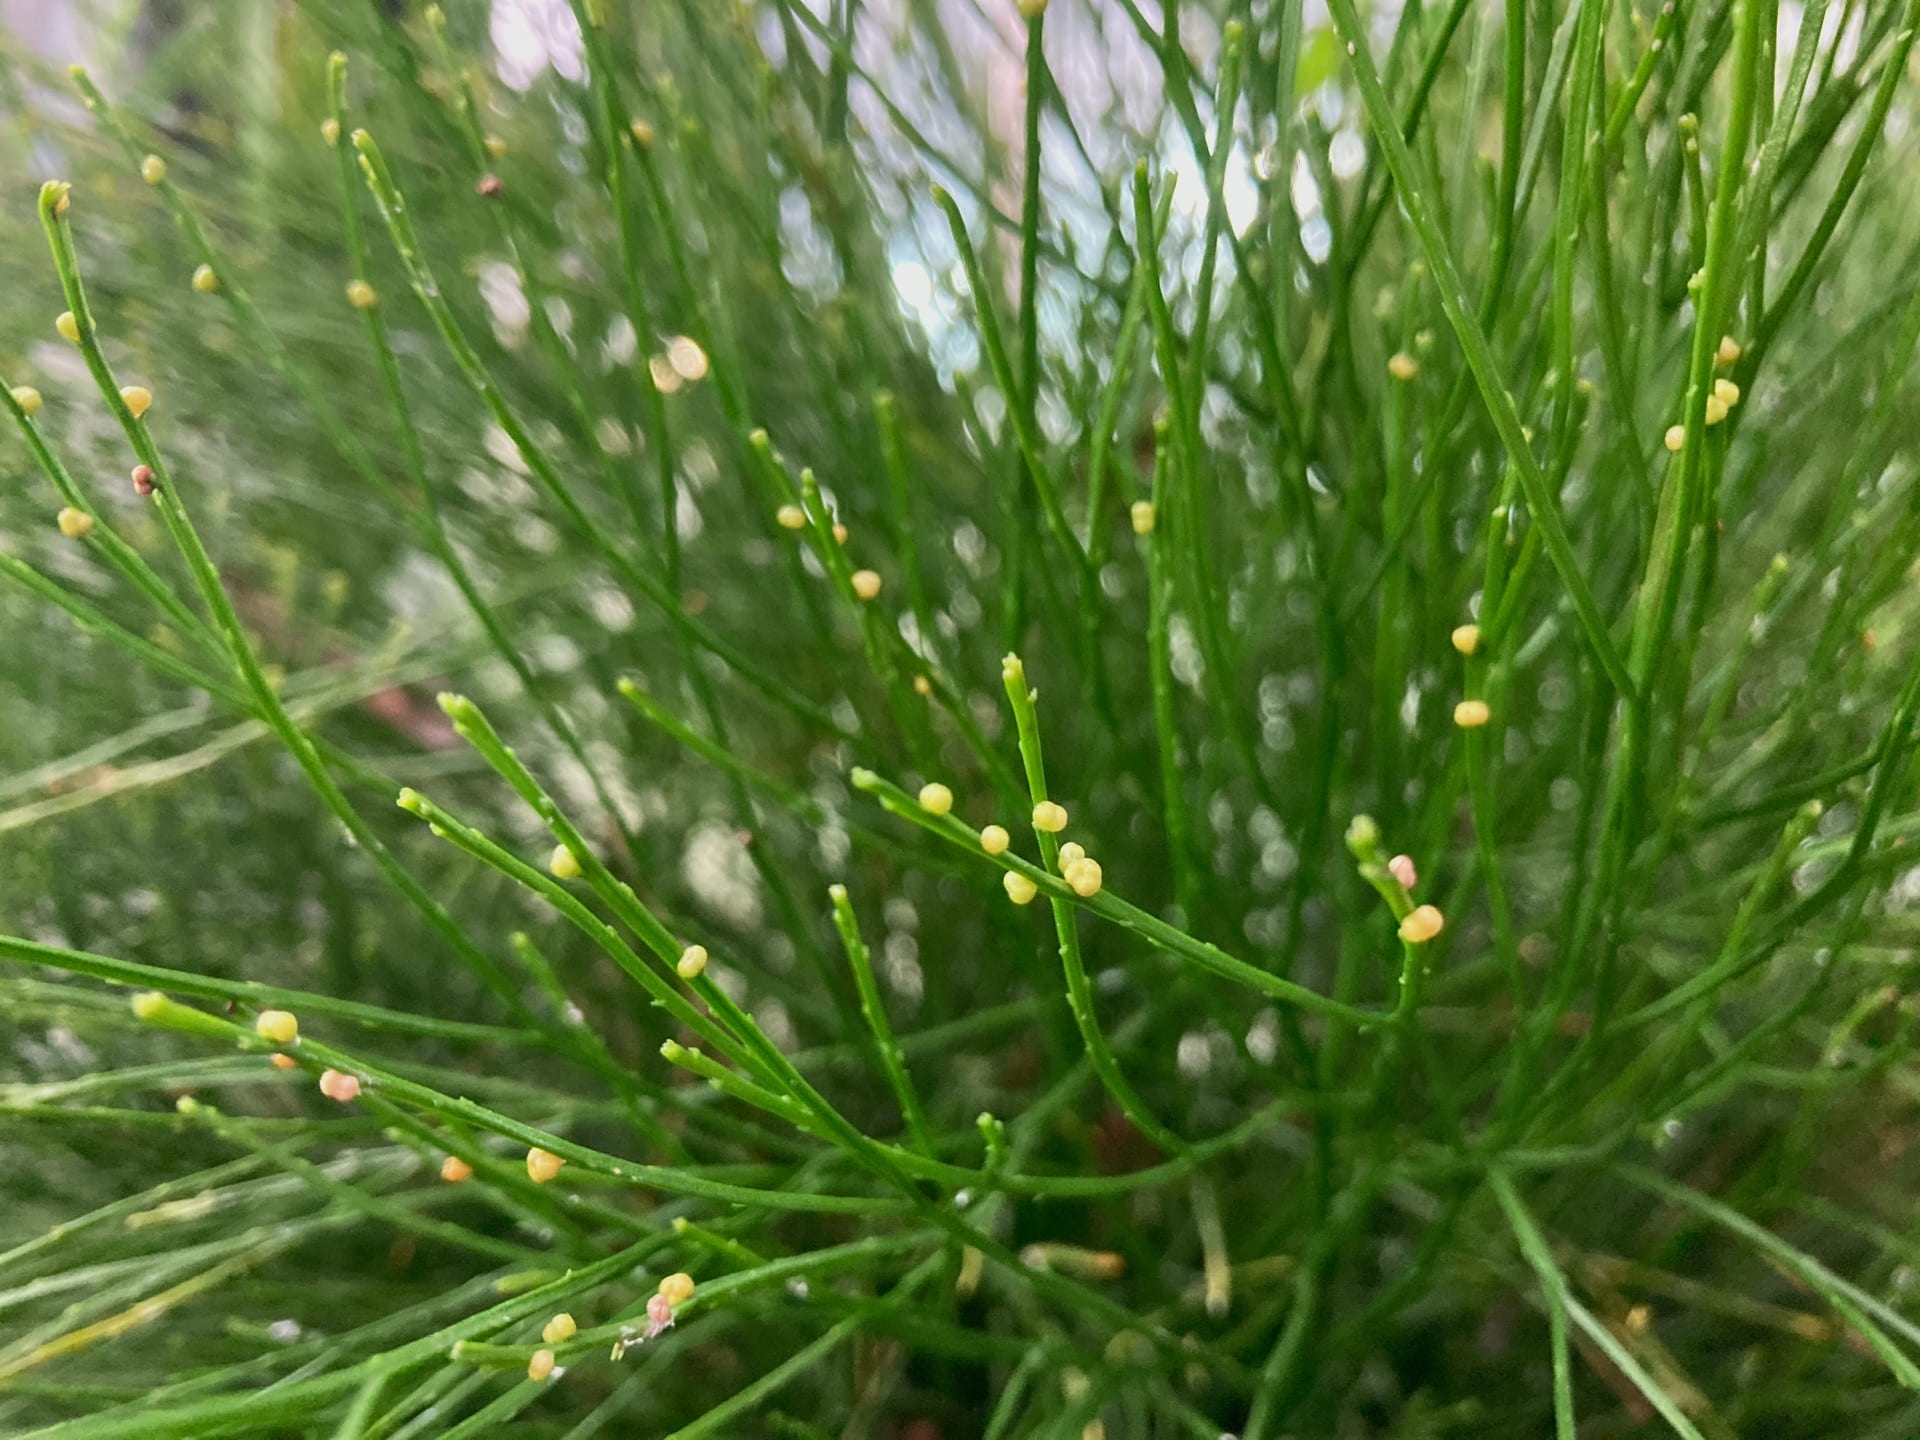 Psilotum x intermedia, the whisk fern, is a fern ally. Like ferns it has a vascular system and reproduces via spore, it differs, in part, by not having any true leaves, relying on its flattened stems for photosynthesis.